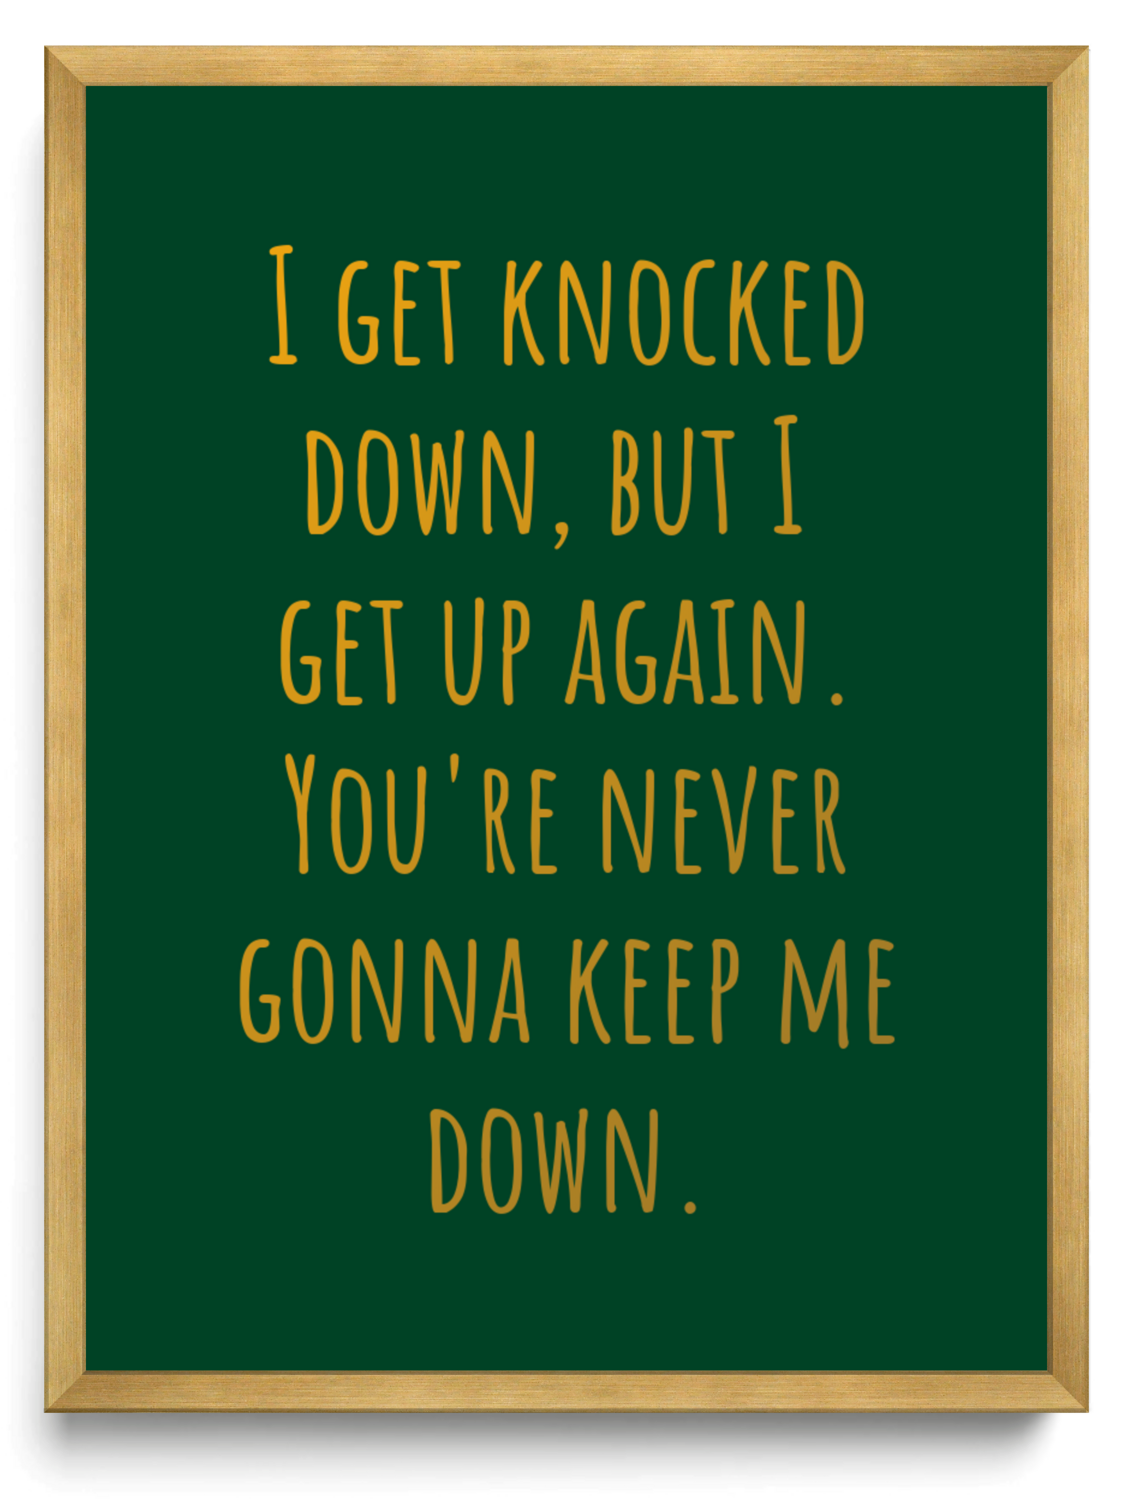 I get knocked down, but I get up again. You're never gonna keep me down.